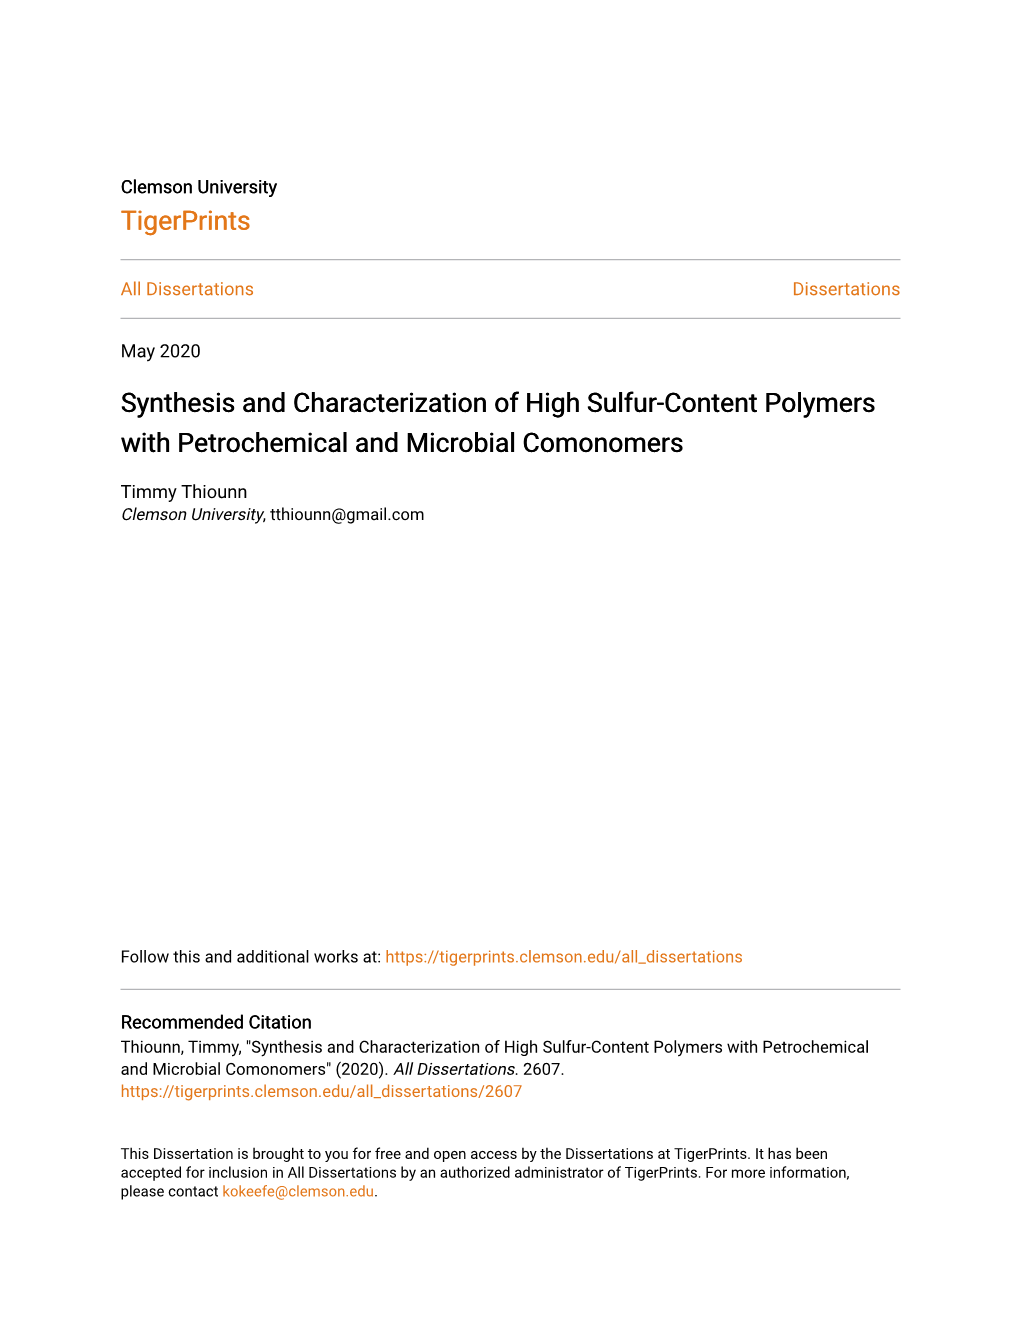 Synthesis and Characterization of High Sulfur-Content Polymers with Petrochemical and Microbial Comonomers